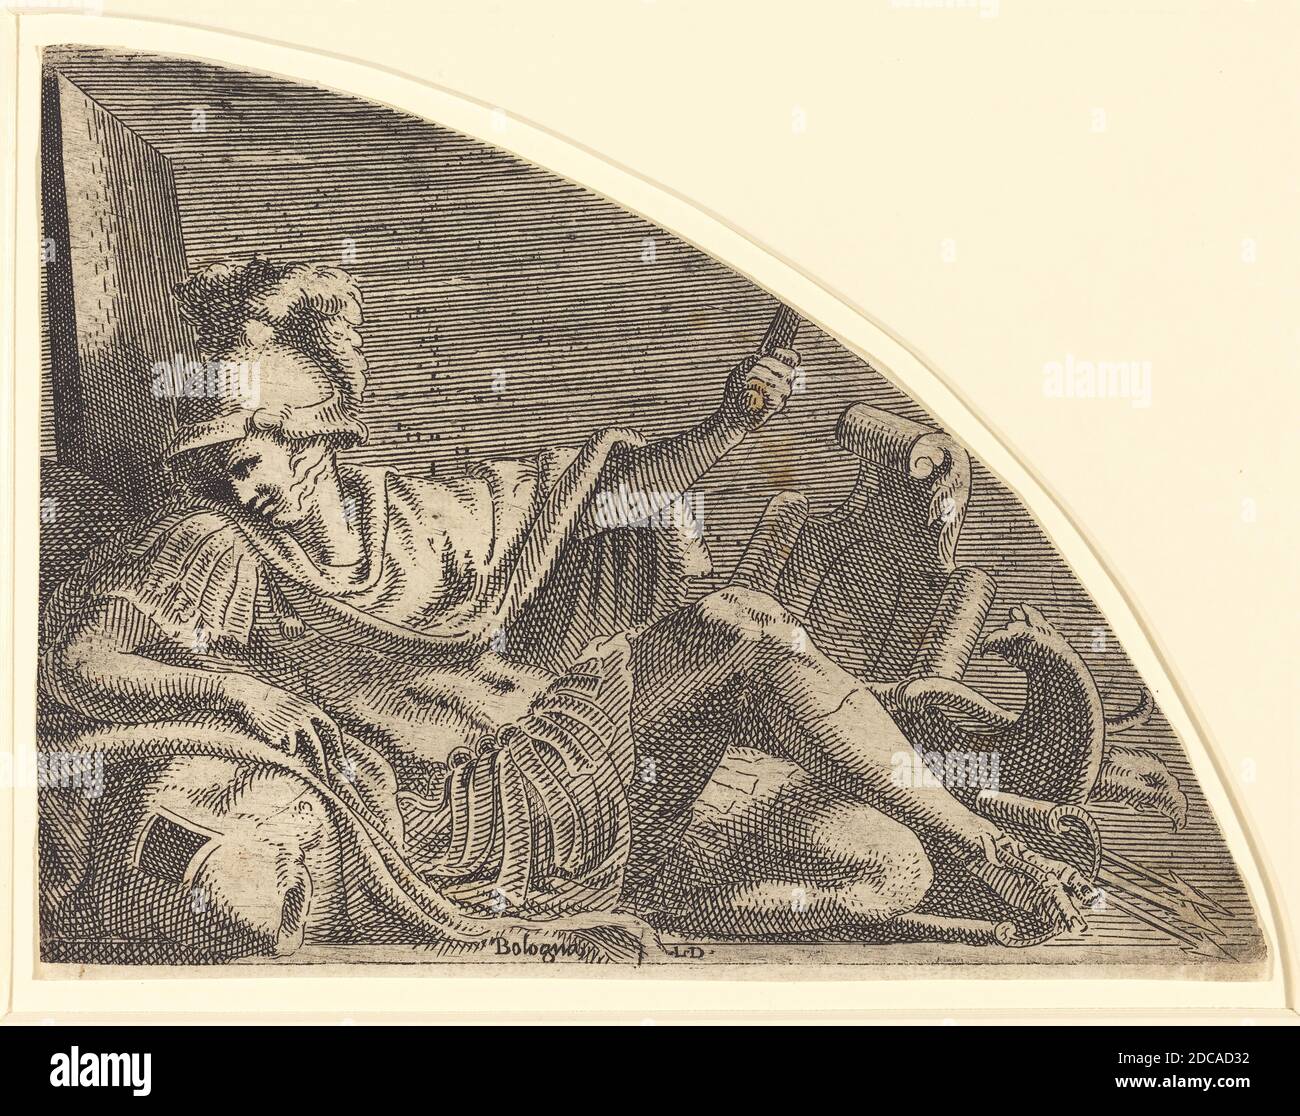 Léon Davent, (artist), French, active 1540 - 1556, Francesco Primaticcio, (artist after), Italian, 1504 - 1570, Mars Seated on Trophies, etching Stock Photo